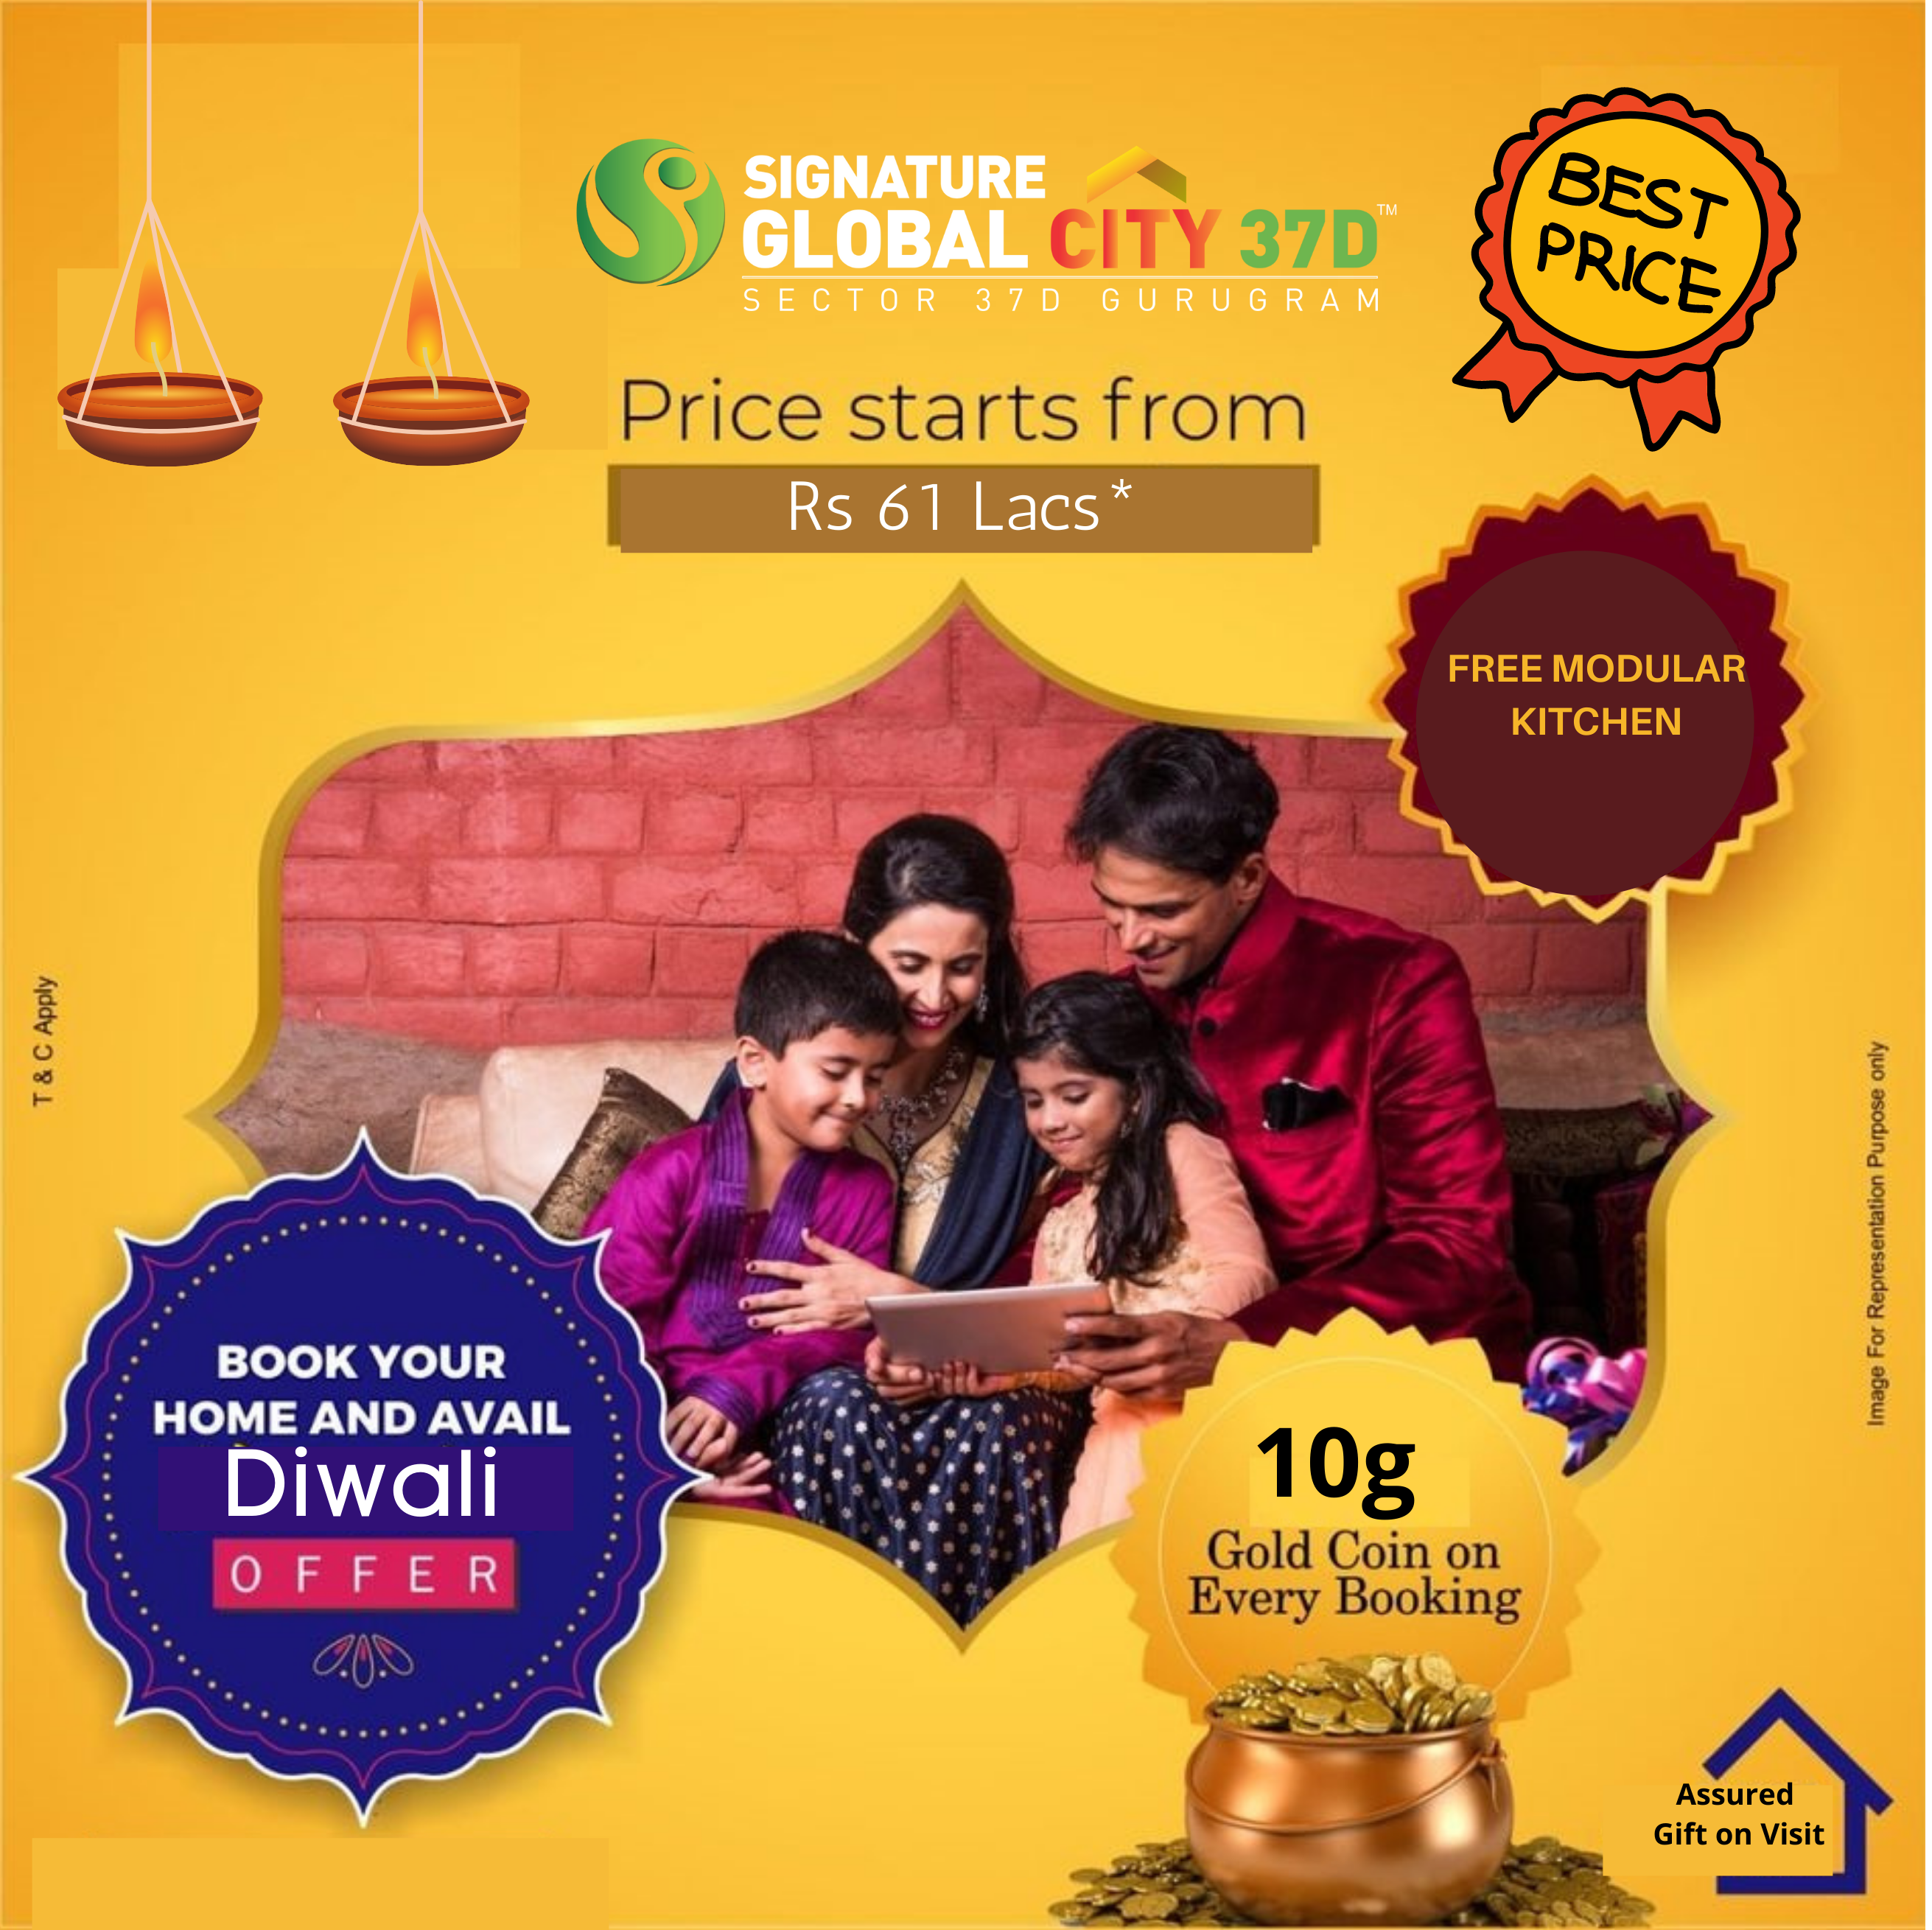 Book Your Home and Avail Diwali Offer at Signature Global City 37D @ 61 Lacs*in Sector 37D Gurgaon Update